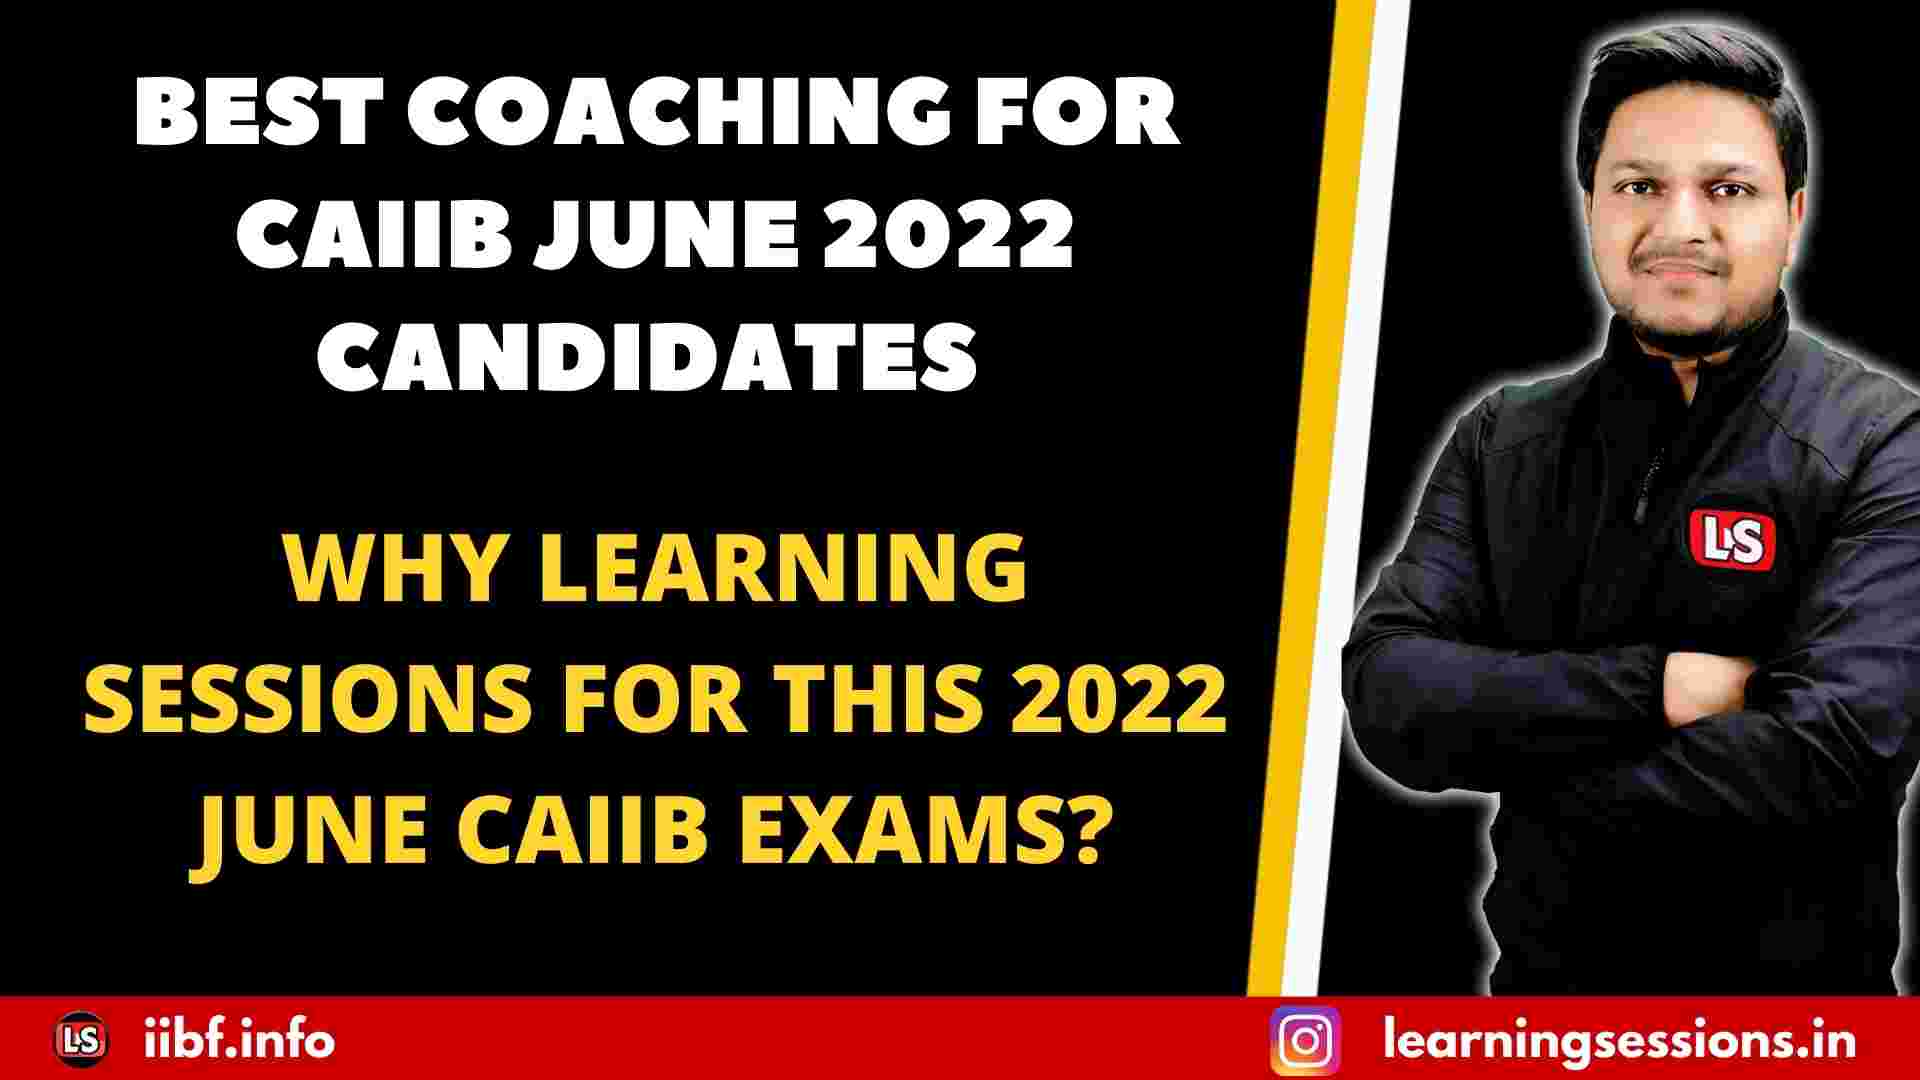 BEST COACHING FOR CAIIB JUNE 2022 CANDIDATES | WHY LEARNING SESSIONS FOR THIS 2022 JUNE CAIIB EXAMS?